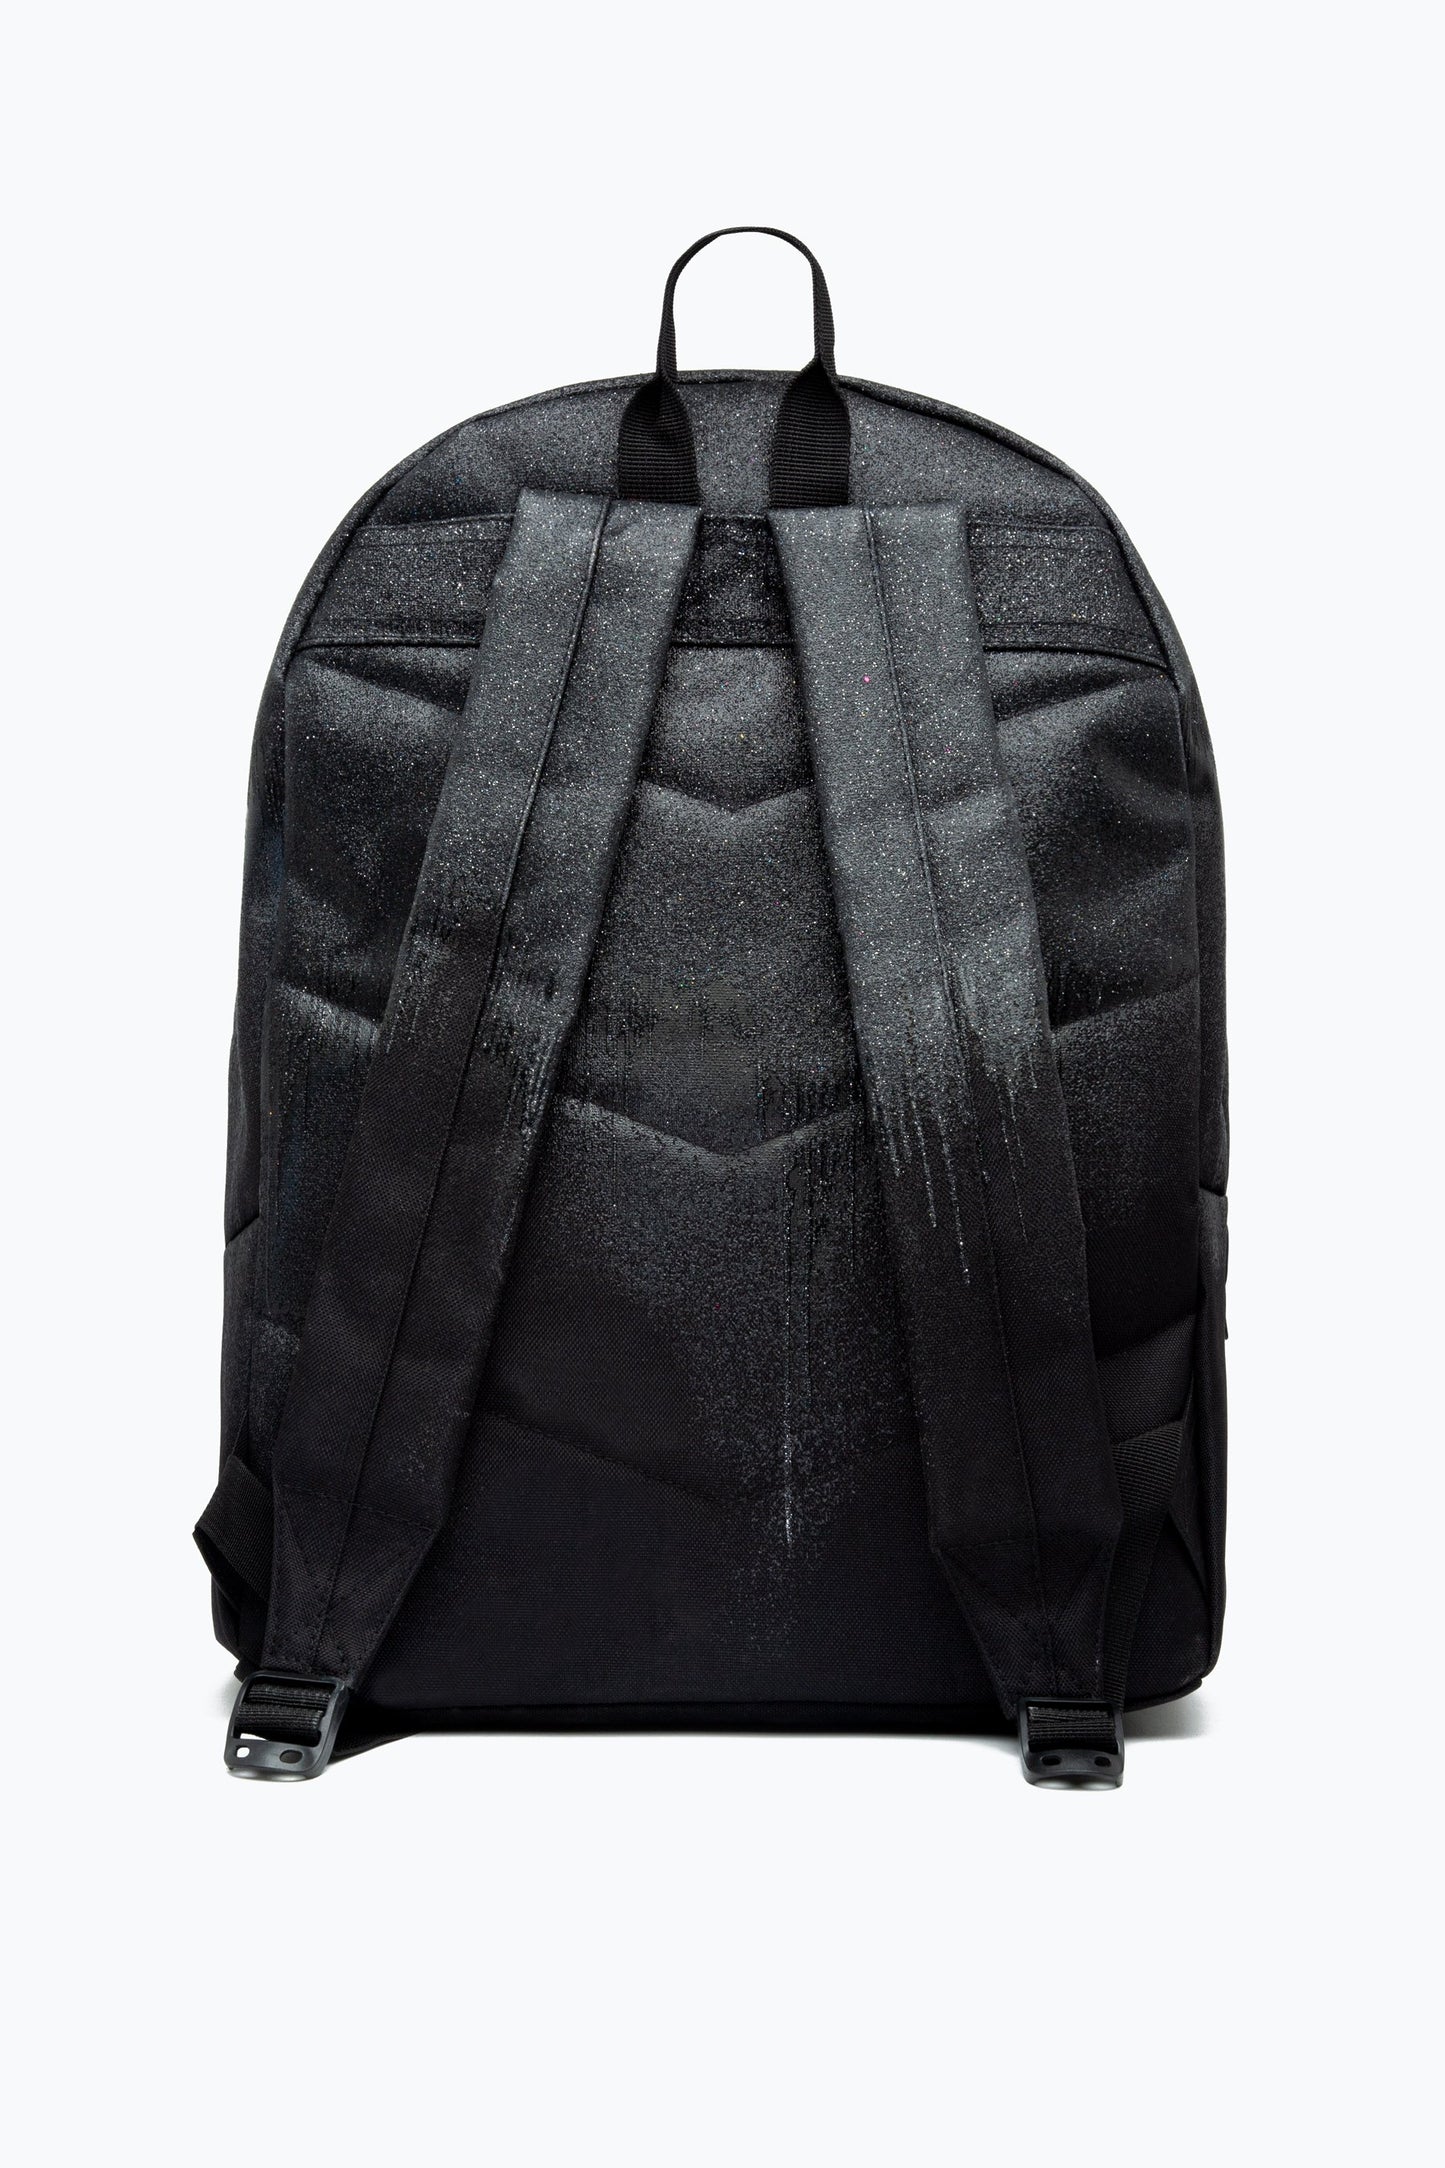 HYPE SPECKLE DRIPS BACKPACK